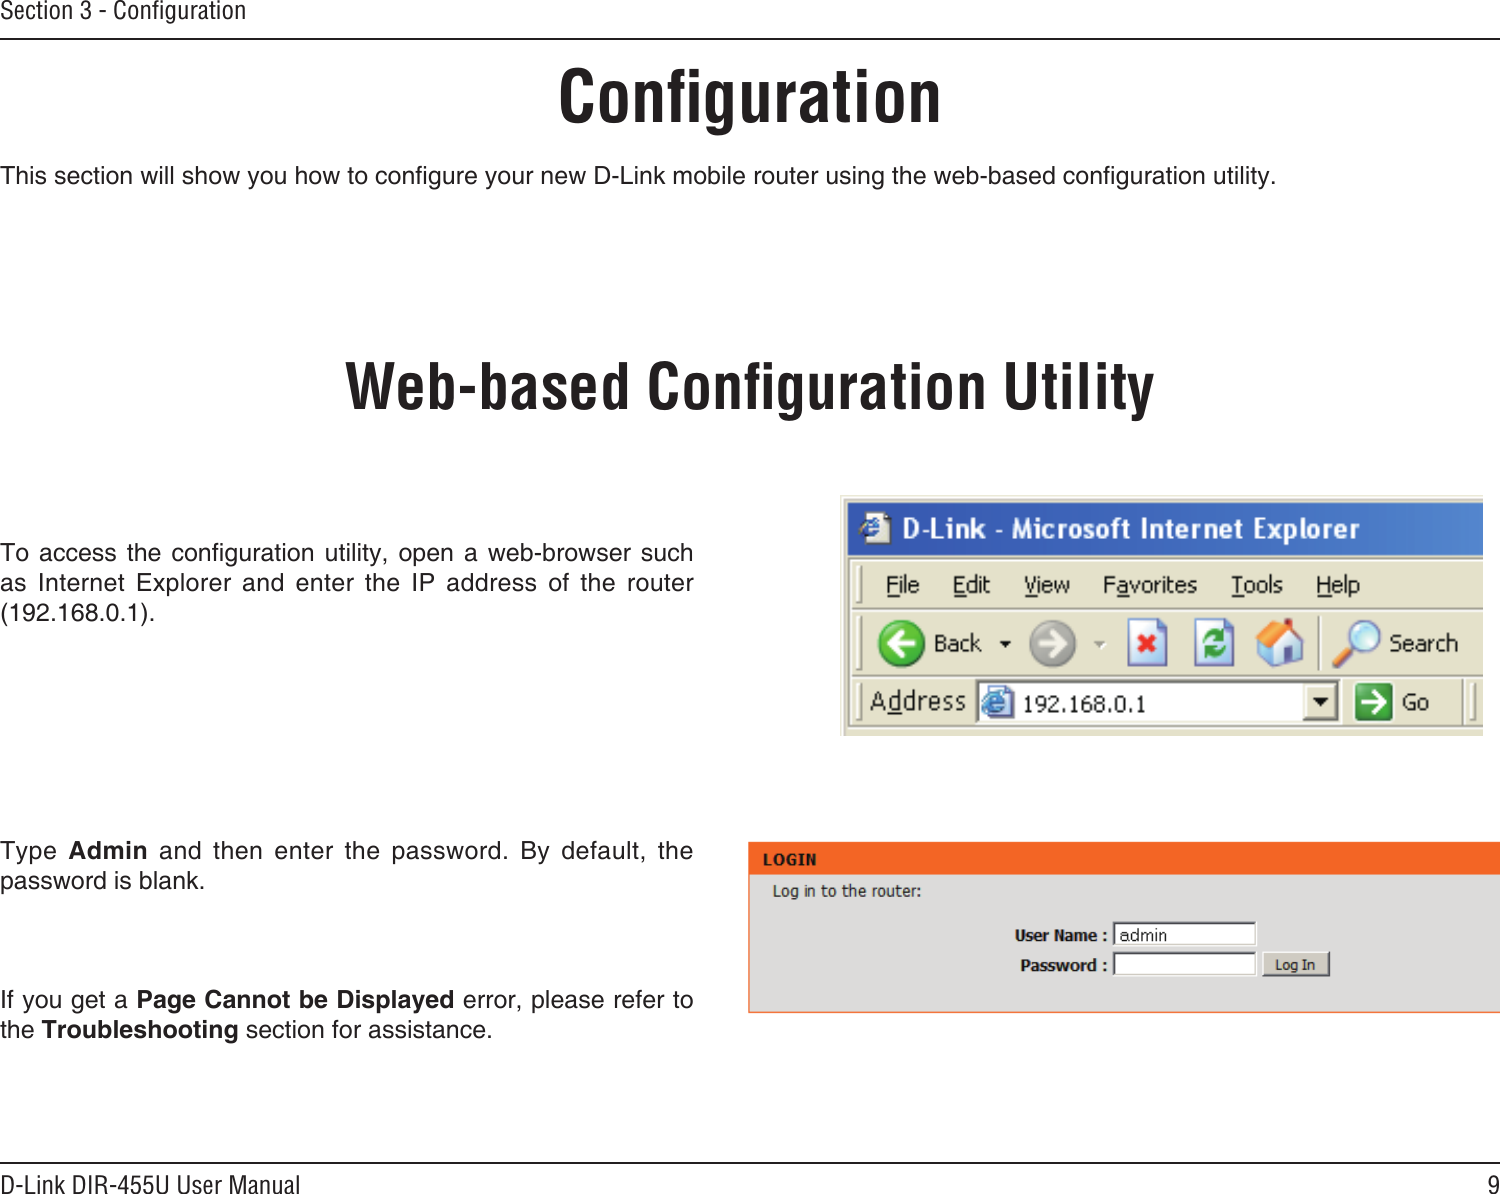 9D-Link DIR-455U User ManualSection 3 - ConﬁgurationConﬁgurationThis section will show you how to congure your new D-Link mobile router using the web-based conguration utility.Web-based Conﬁguration UtilityTo access  the conguration  utility, open  a web-browser  such as  Internet  Explorer  and  enter  the  IP  address  of  the  router (192.168.0.1).Type  Admin  and  then  enter  the  password.  By  default,  the password is blank.If you get a Page Cannot be Displayed error, please refer to the Troubleshooting section for assistance.